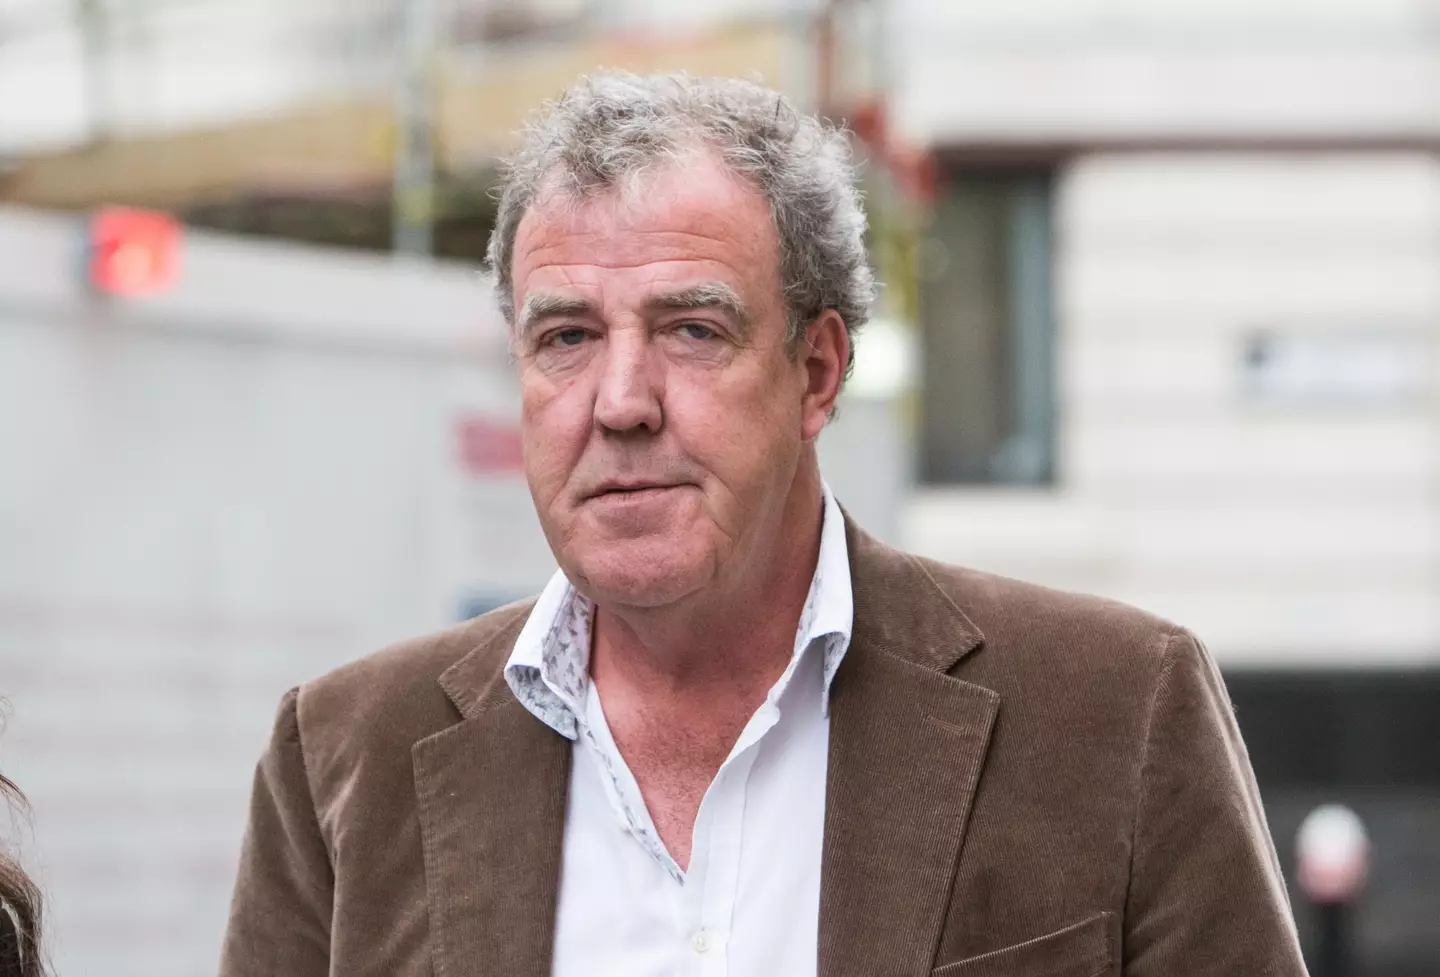 Clarkson was once threatened by a woman wanting to sue him as she injured herself  'trespassing' on his farm.